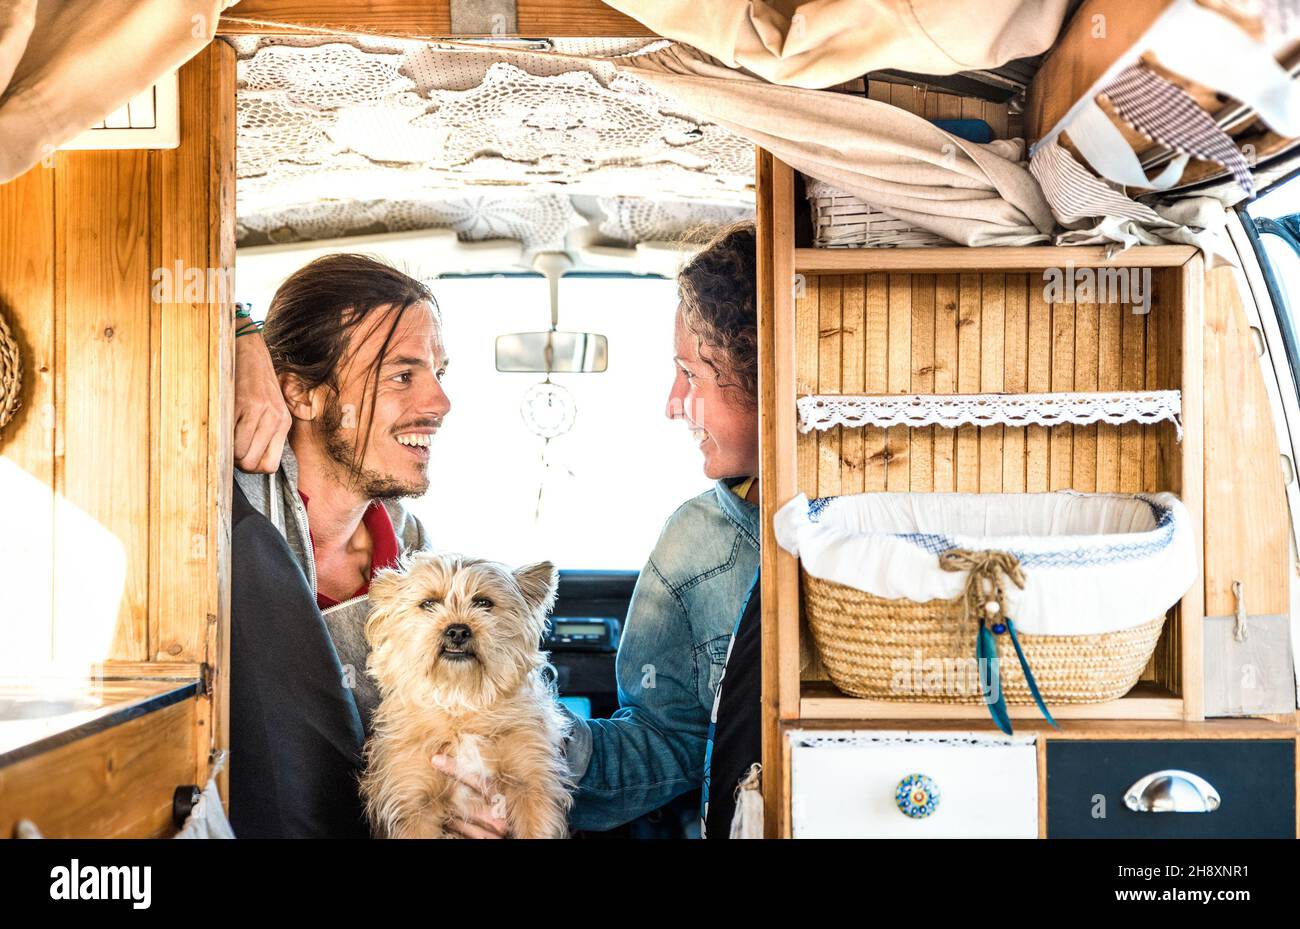 Indie couple with little dog traveling together on oldtimer mini van transport - Travel lifestyle concept with hipster people on minivan adventure Stock Photo